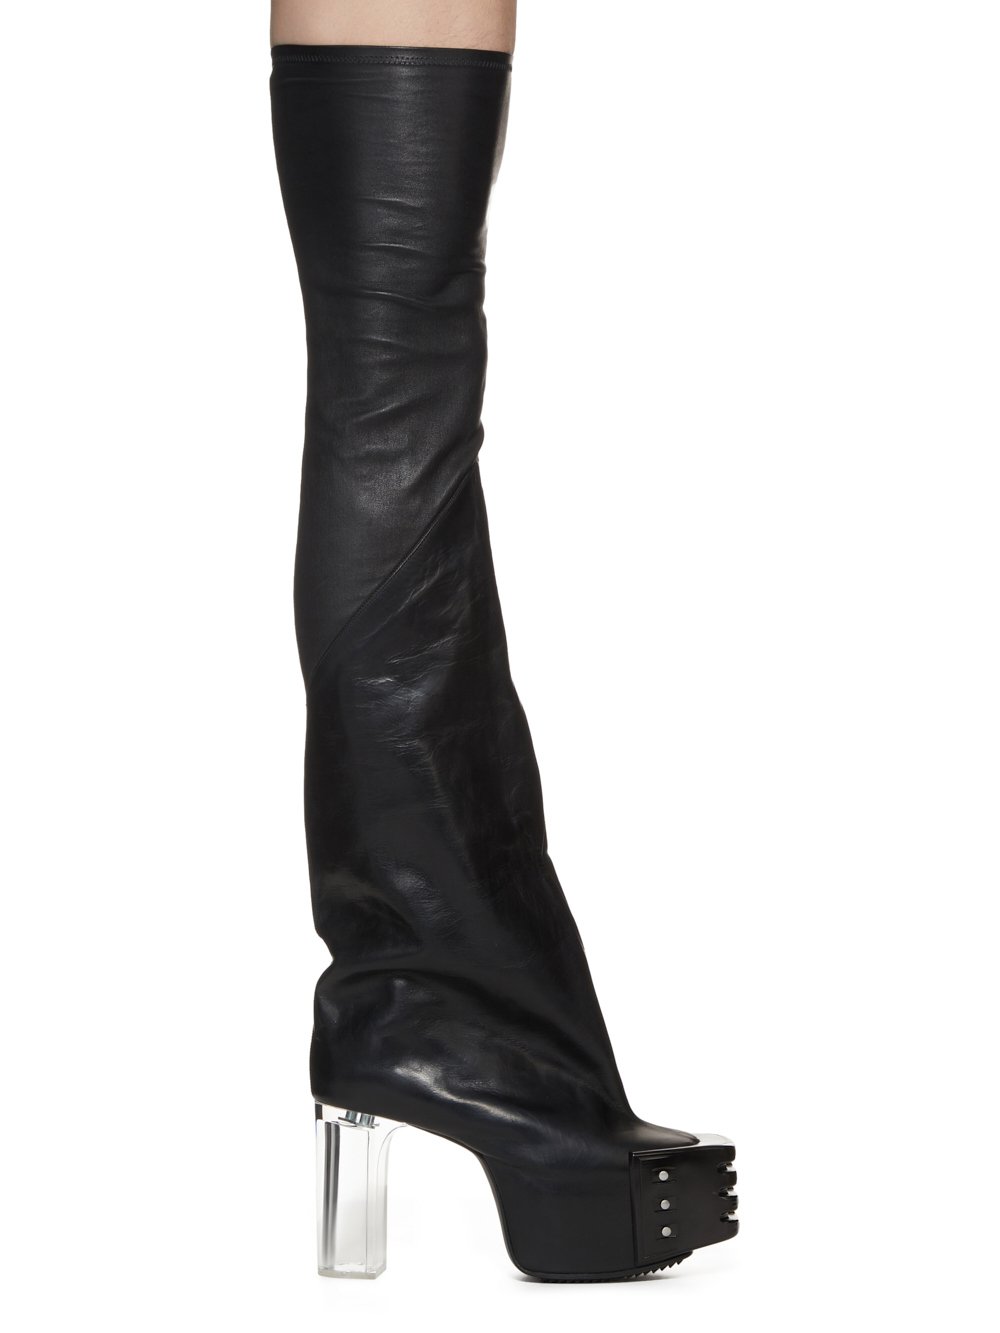 RICK OWENS FW23 LUXOR RUNWAY FLARED PLATFORMS 45 IN BLACK STRETCH LAMB LEATHER AND GROPPONE COW LEATHER 